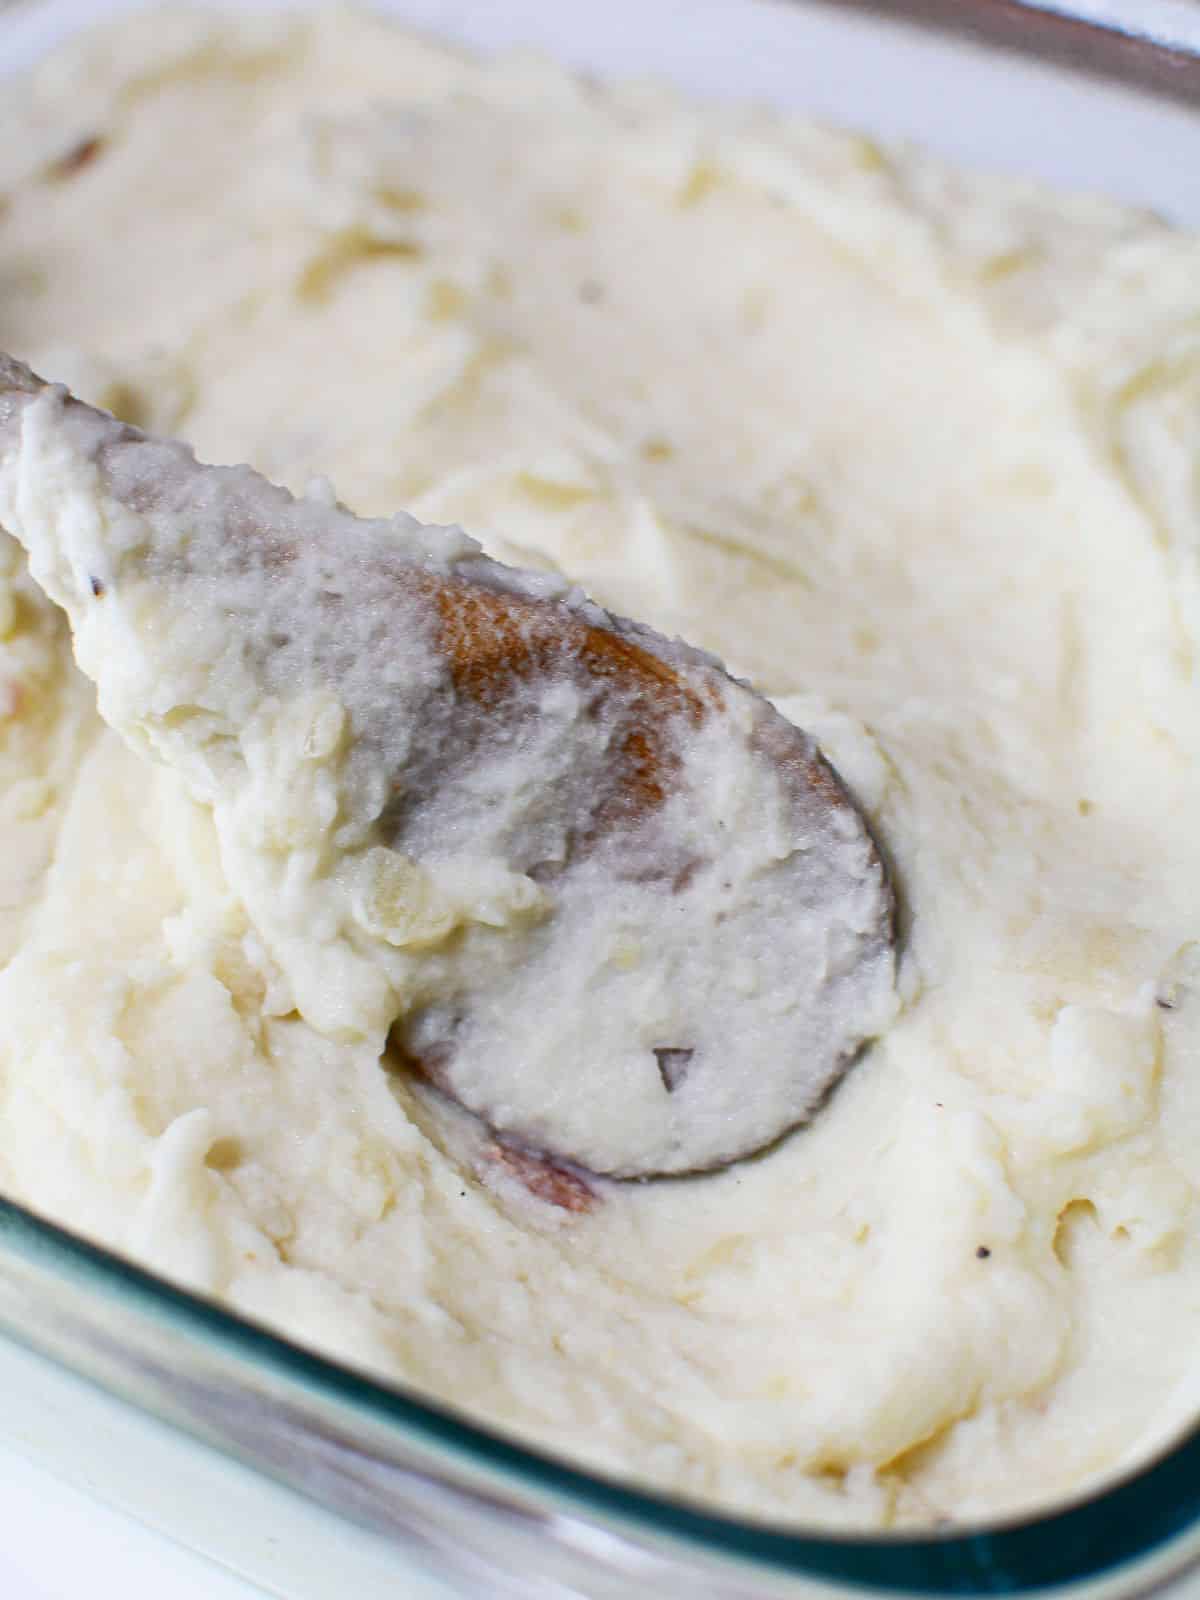 Mashed potatoes in casserole dish with wooden spoon.